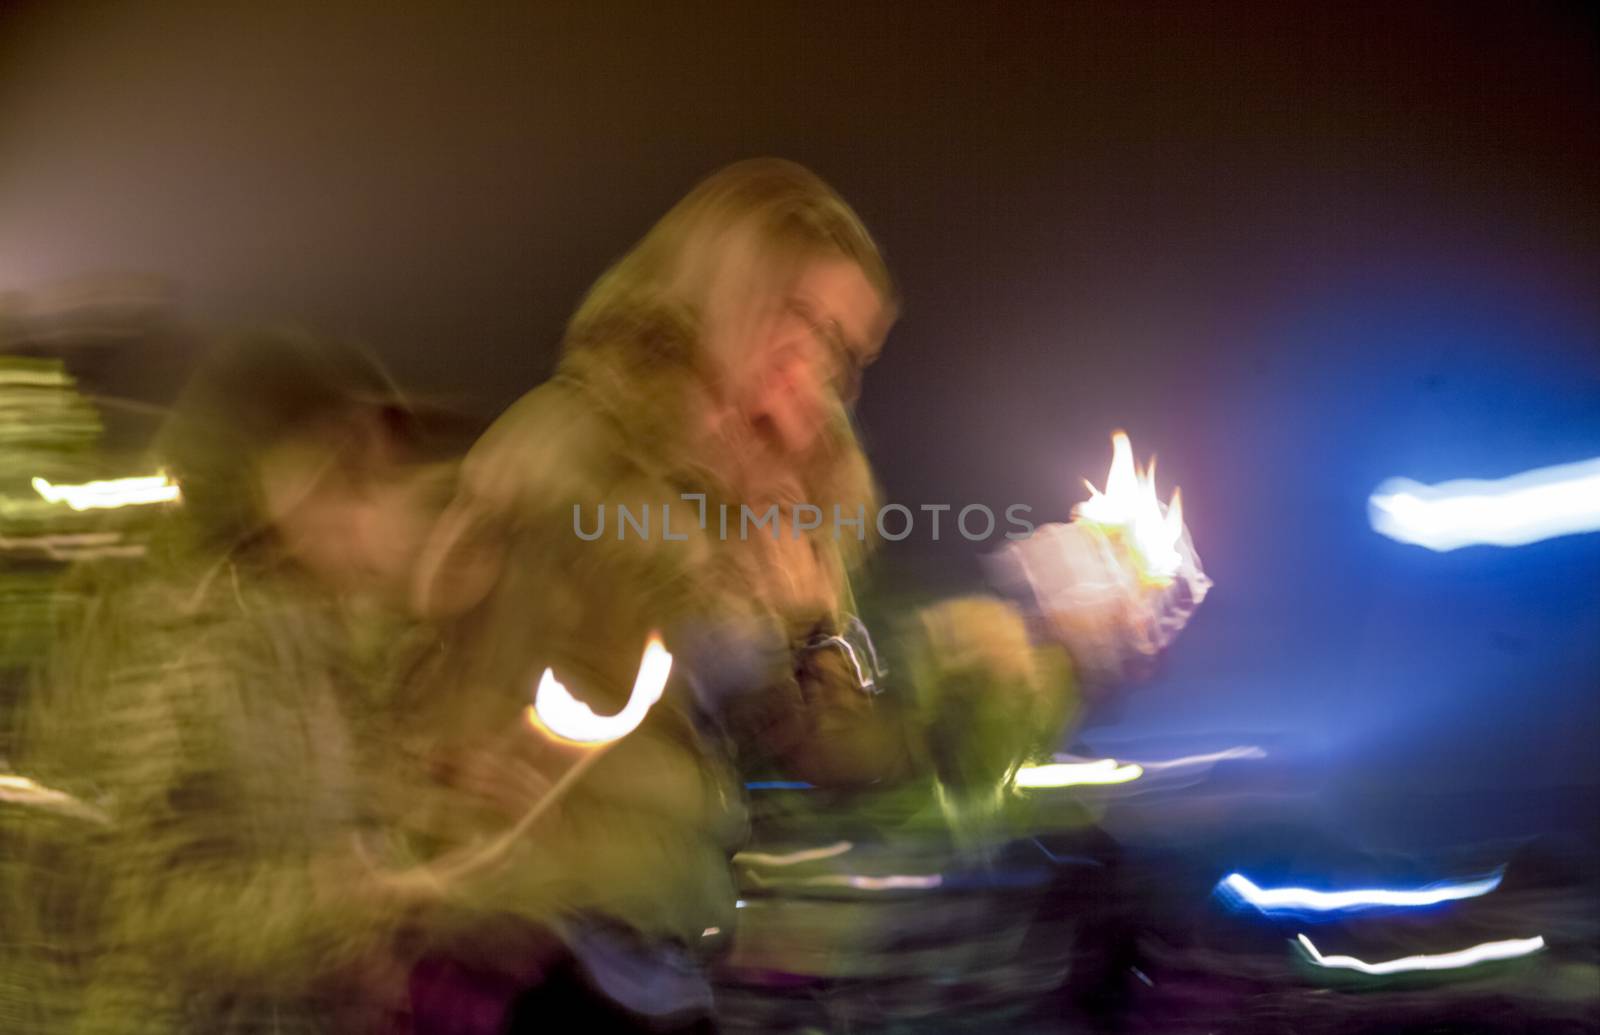 A blurred image of people with candles in their hands mourning or celebrating outdoors. Night.